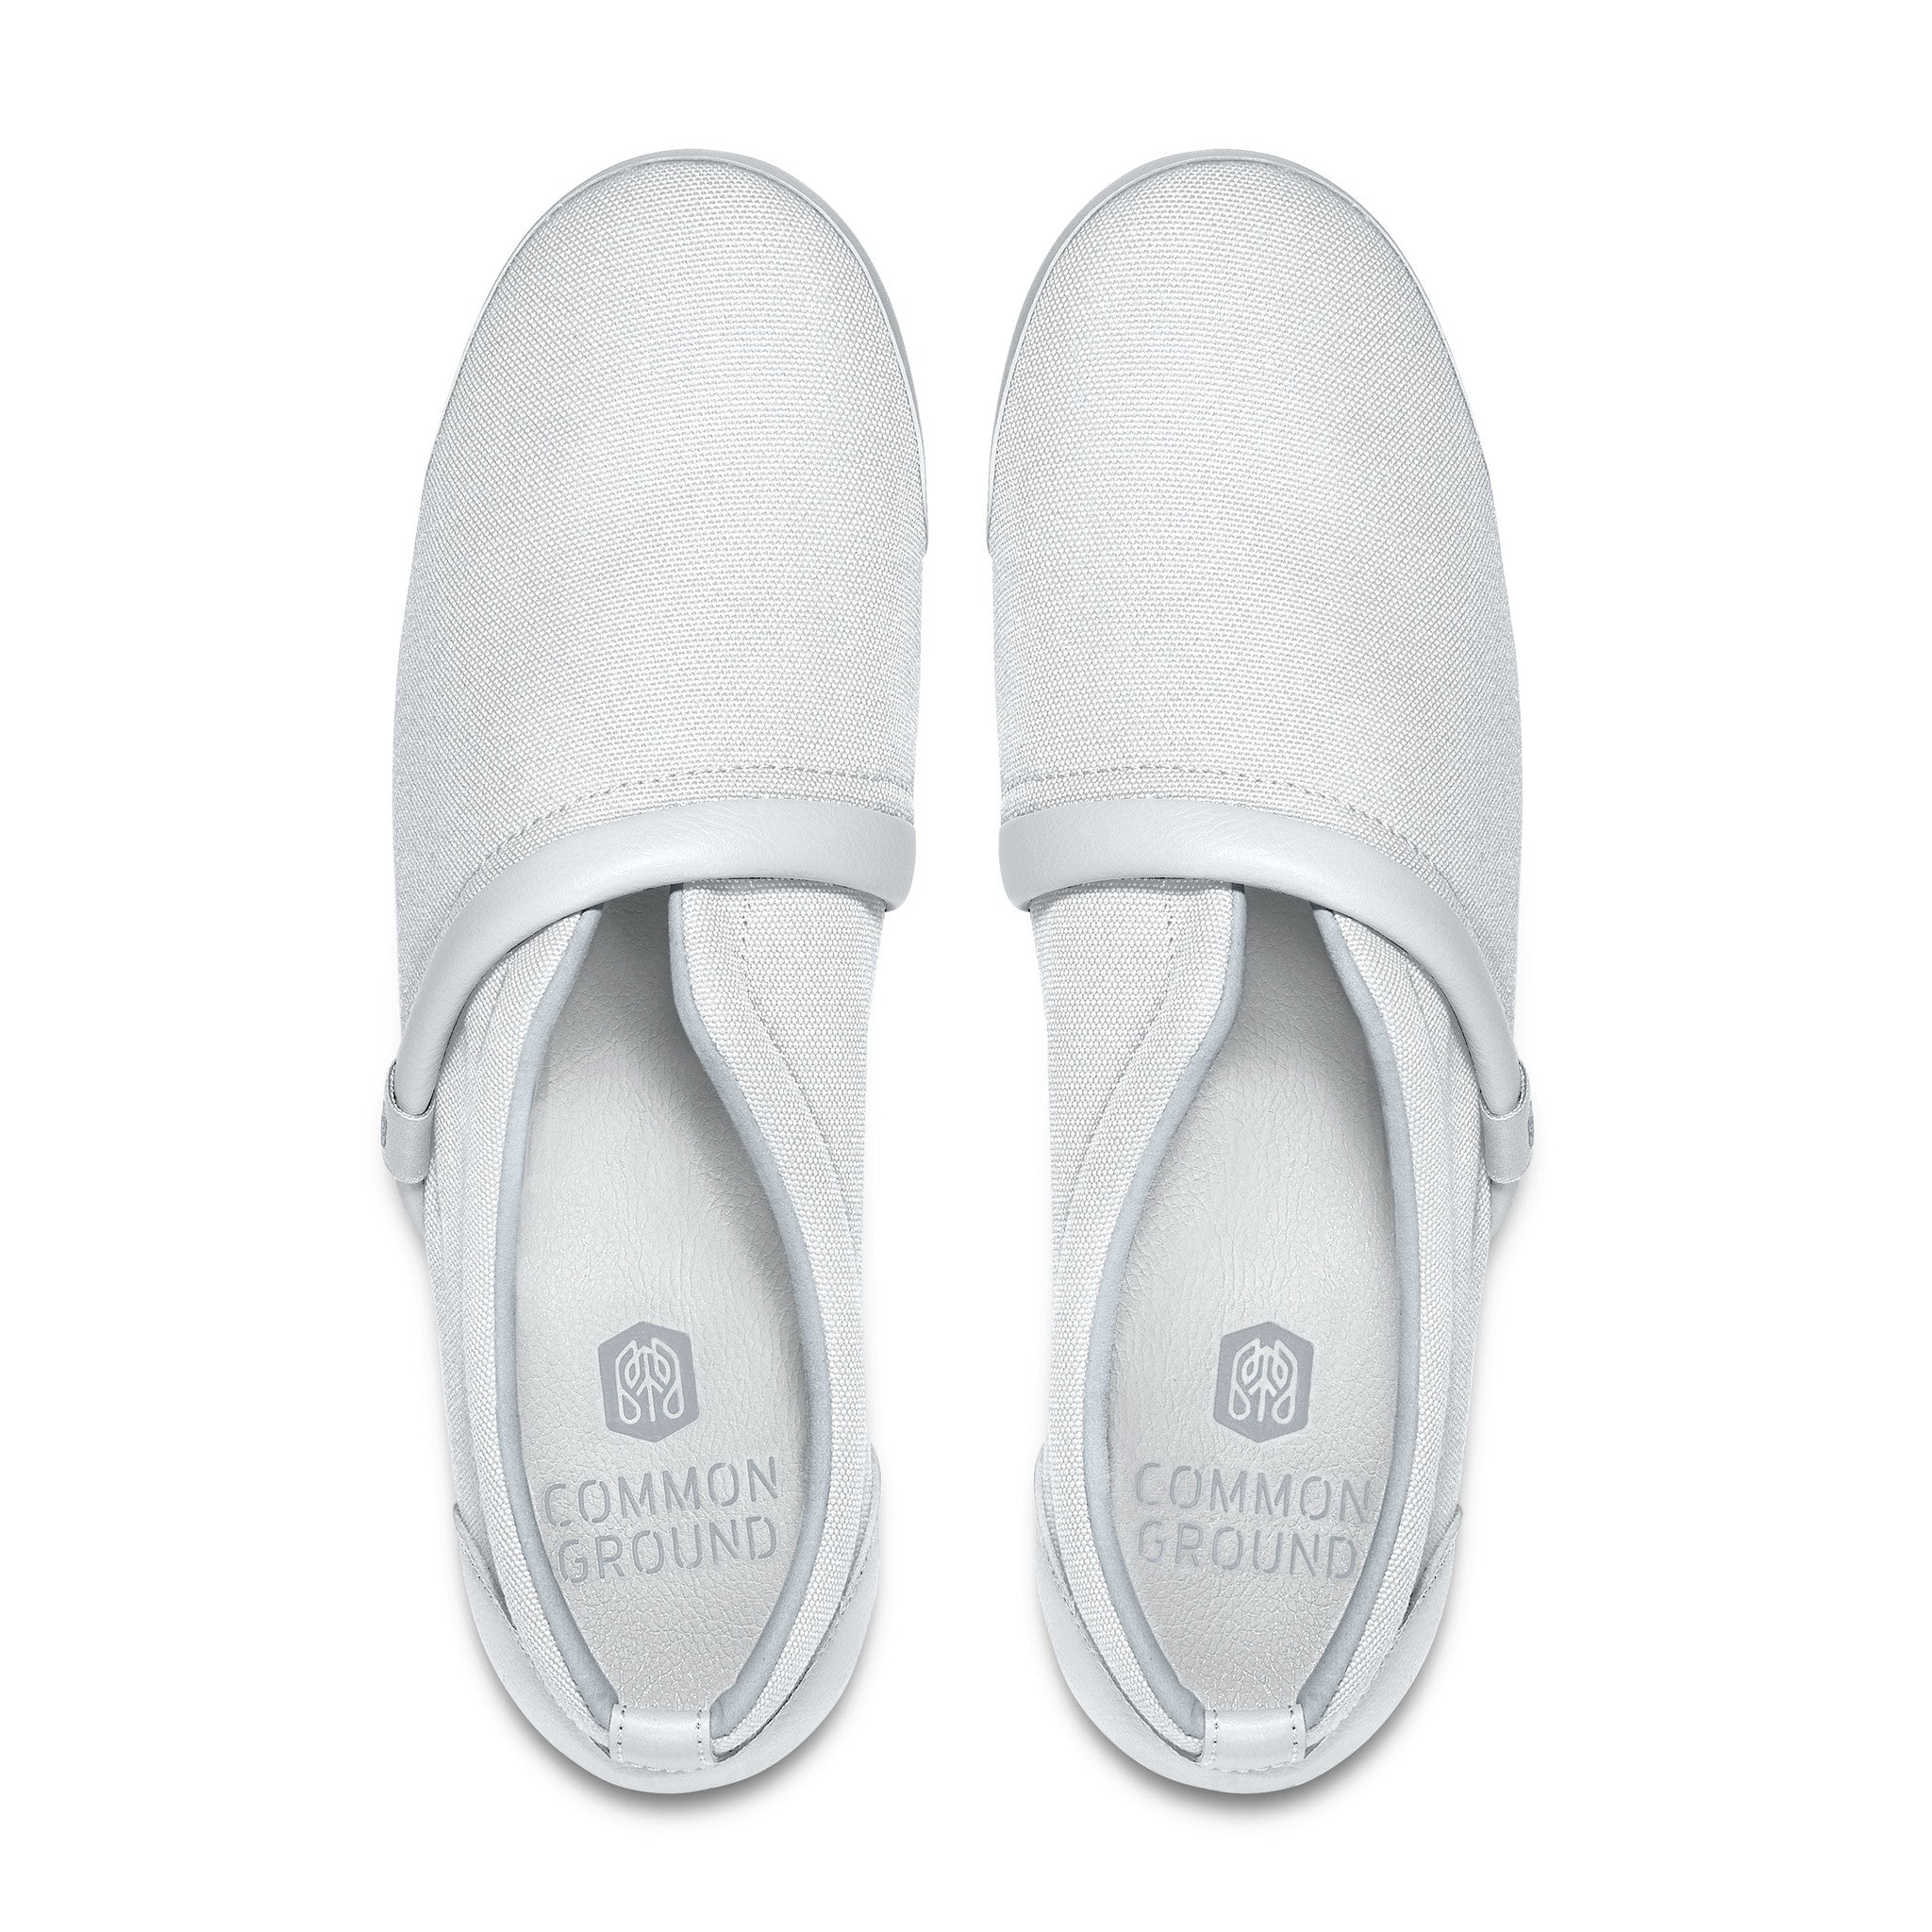 Bright_White - Common Ground Footwear Shoes Top View